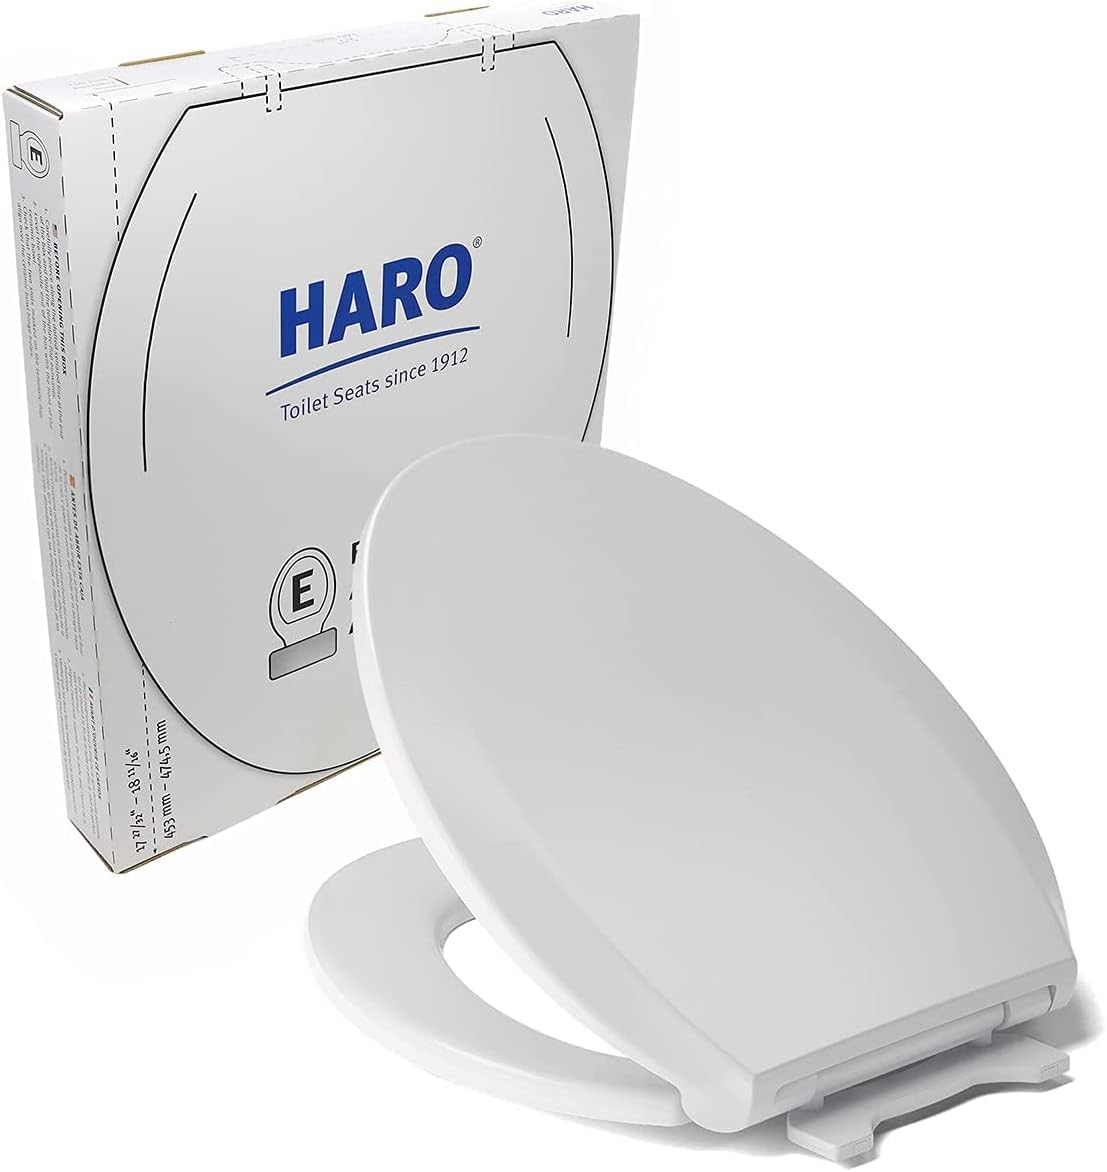 Haro | ELONGATED Toilet Seat | Slow-Close-Seat | Heavy-Duty up to 550 lbs, Quick-Release